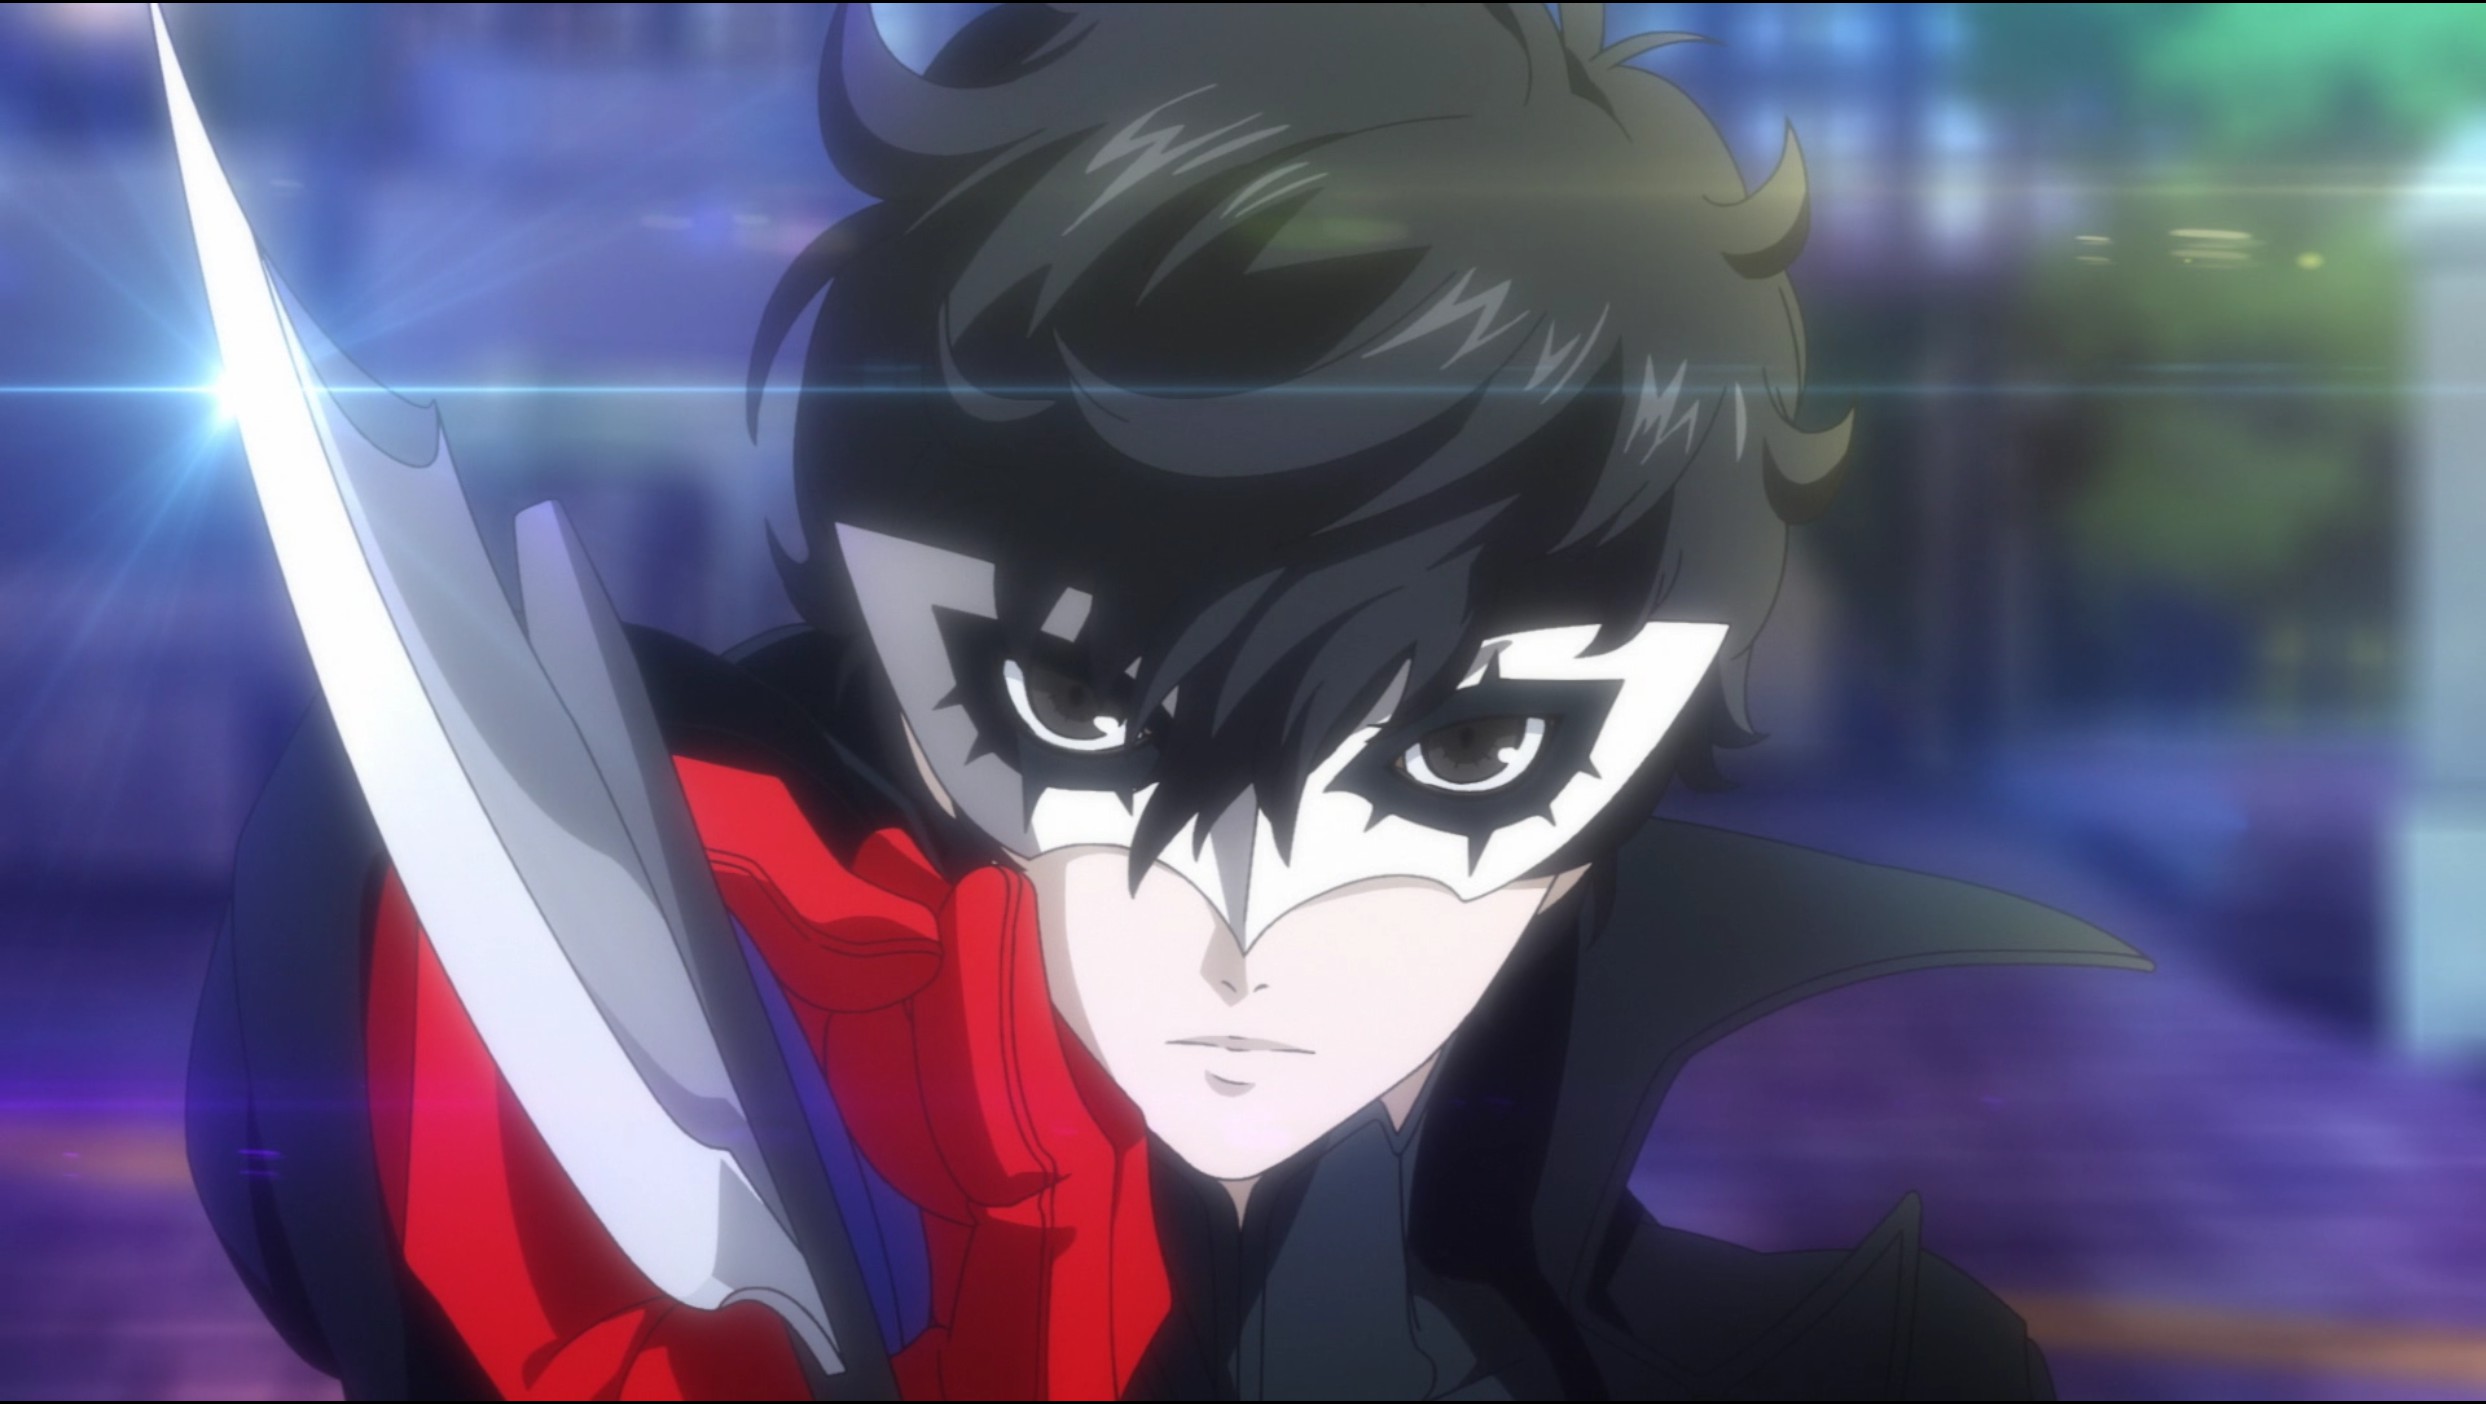 Persona 5 Strikers: How To Change Character